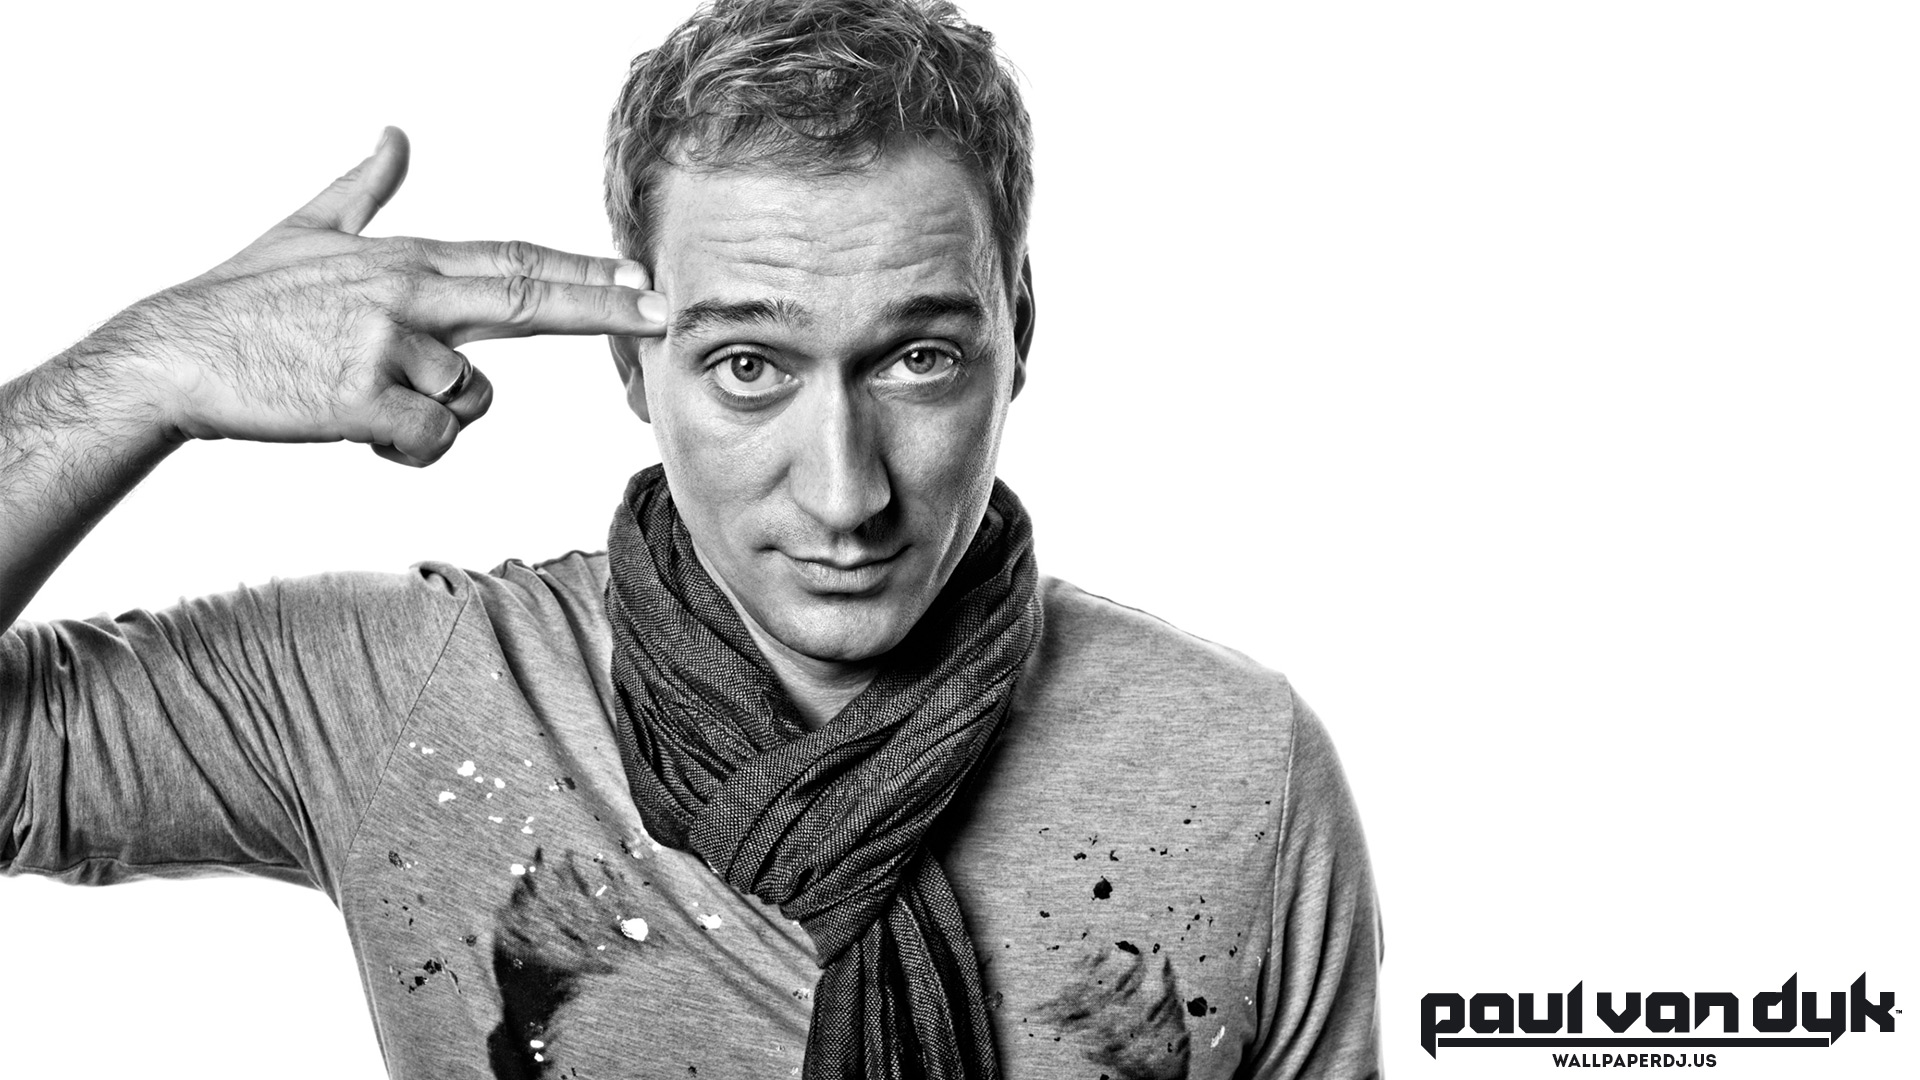 Paul Van Dyk - Music , fitness and motivational wallpapers